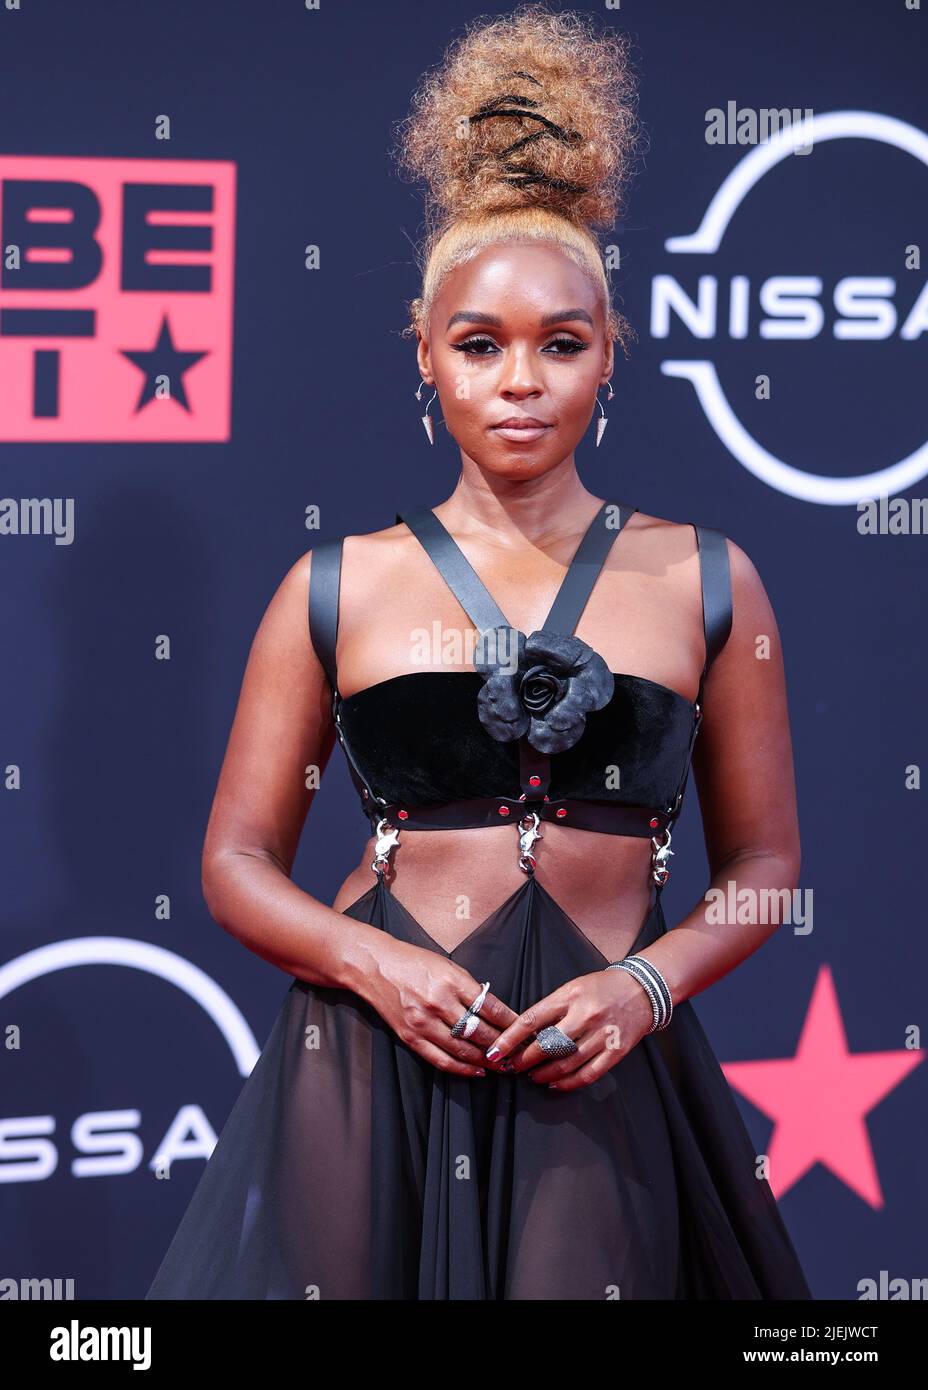 LOS ANGELES, CALIFORNIA, USA - JUNE 26: American singer-songwriter Janelle Monáe (Janelle Monae) wearing a Roberto Cavalli dress arrives at the BET Awards 2022 held at Microsoft Theater at L.A. Live on June 26, 2022 in Los Angeles, California, United States. (Photo by Xavier Collin/Image Press Agency) Credit: Image Press Agency/Alamy Live News Stock Photo